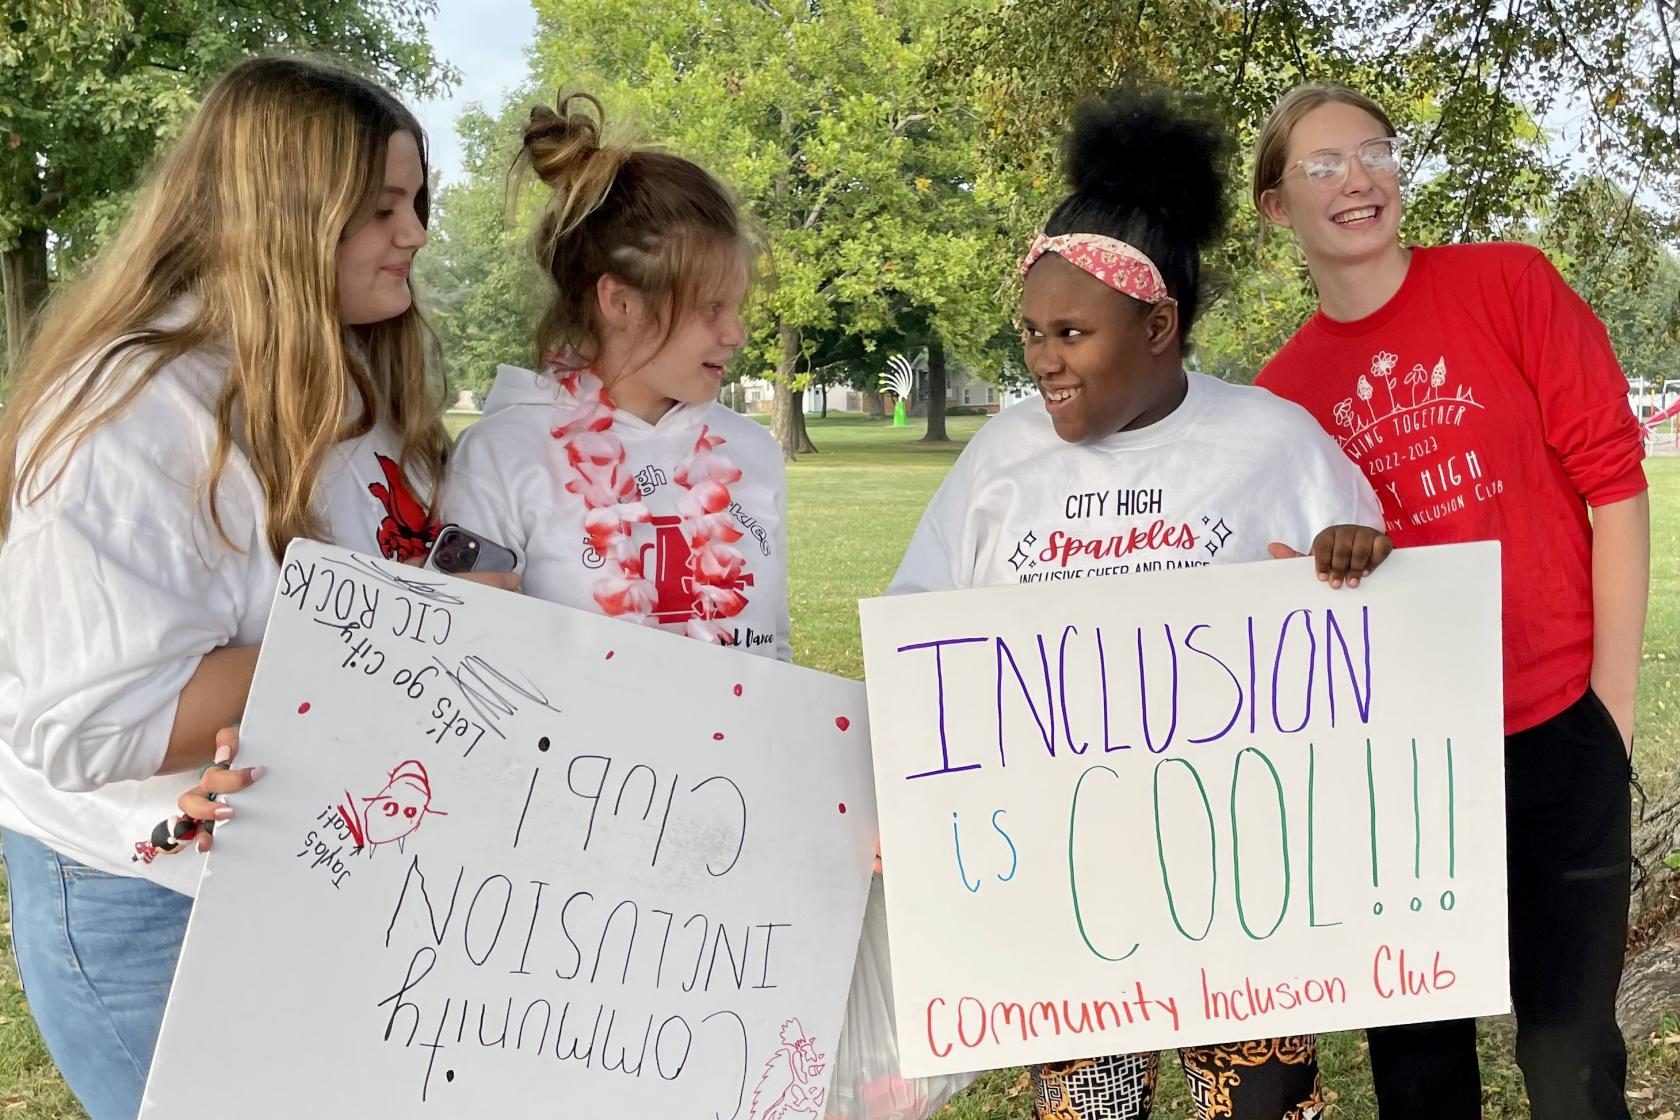 Members of Inclusion Club before marching in the Homecoming Parade